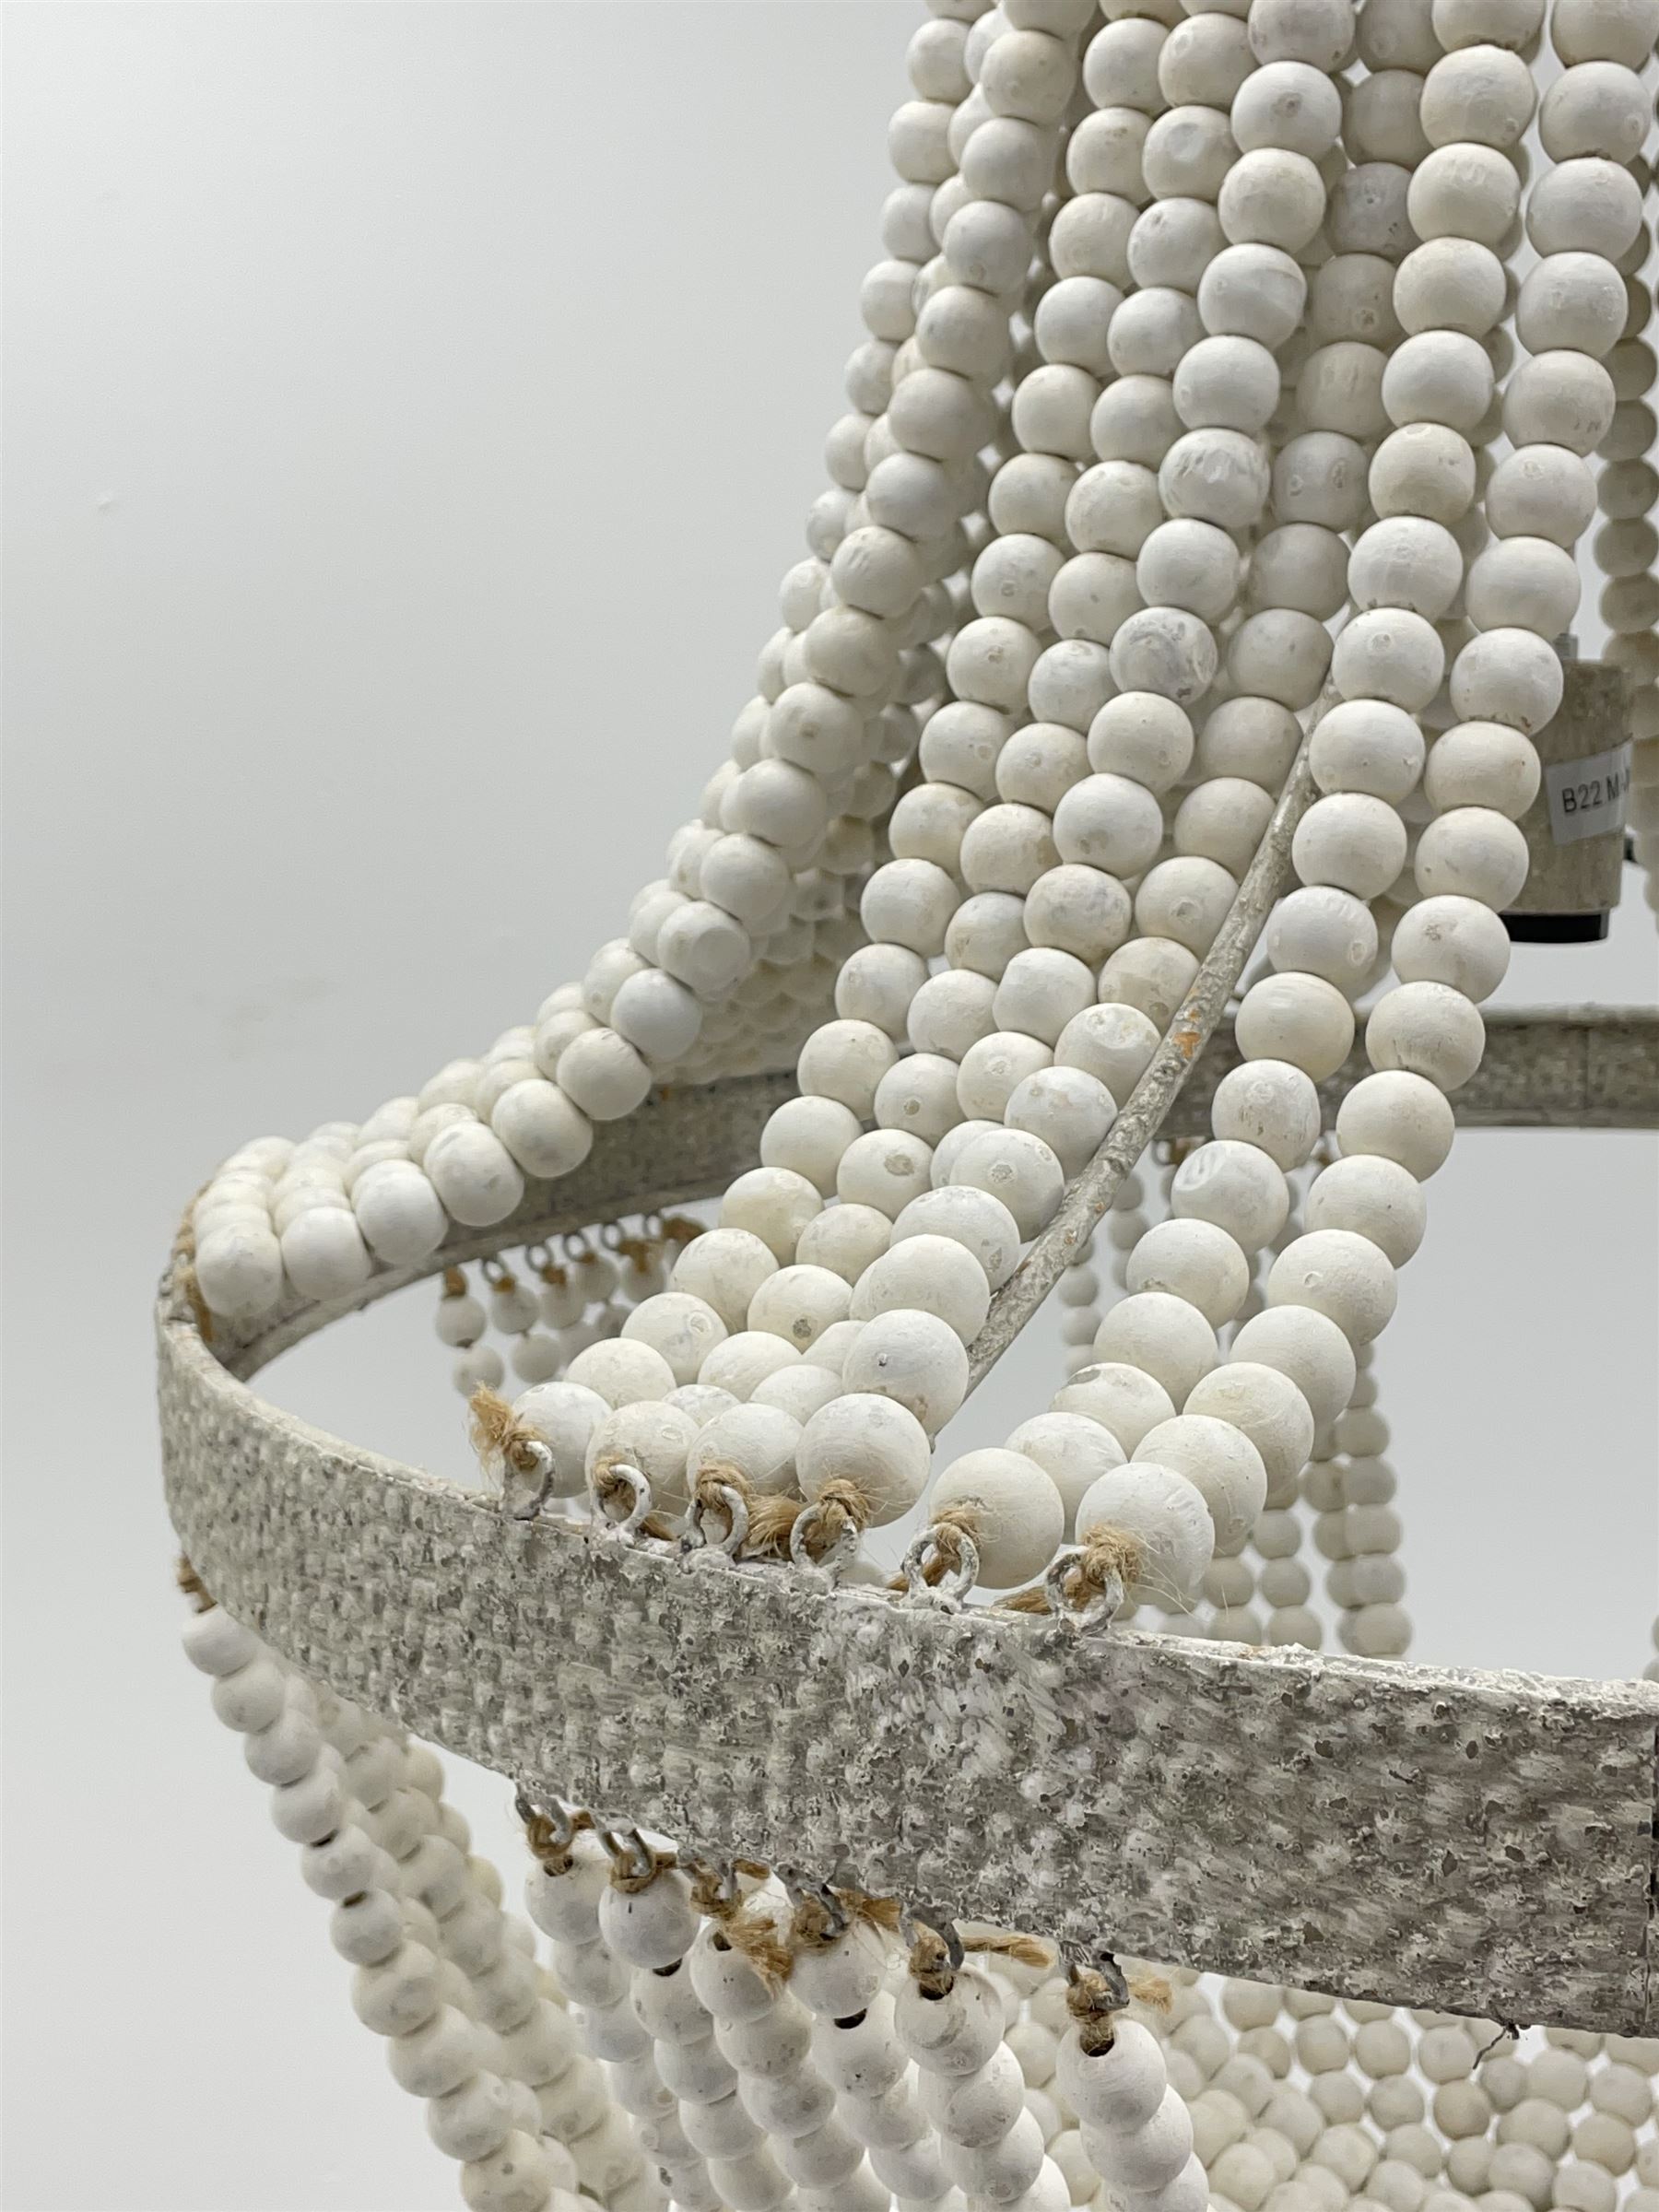 White painted beadwork basket chandelier - Image 2 of 4